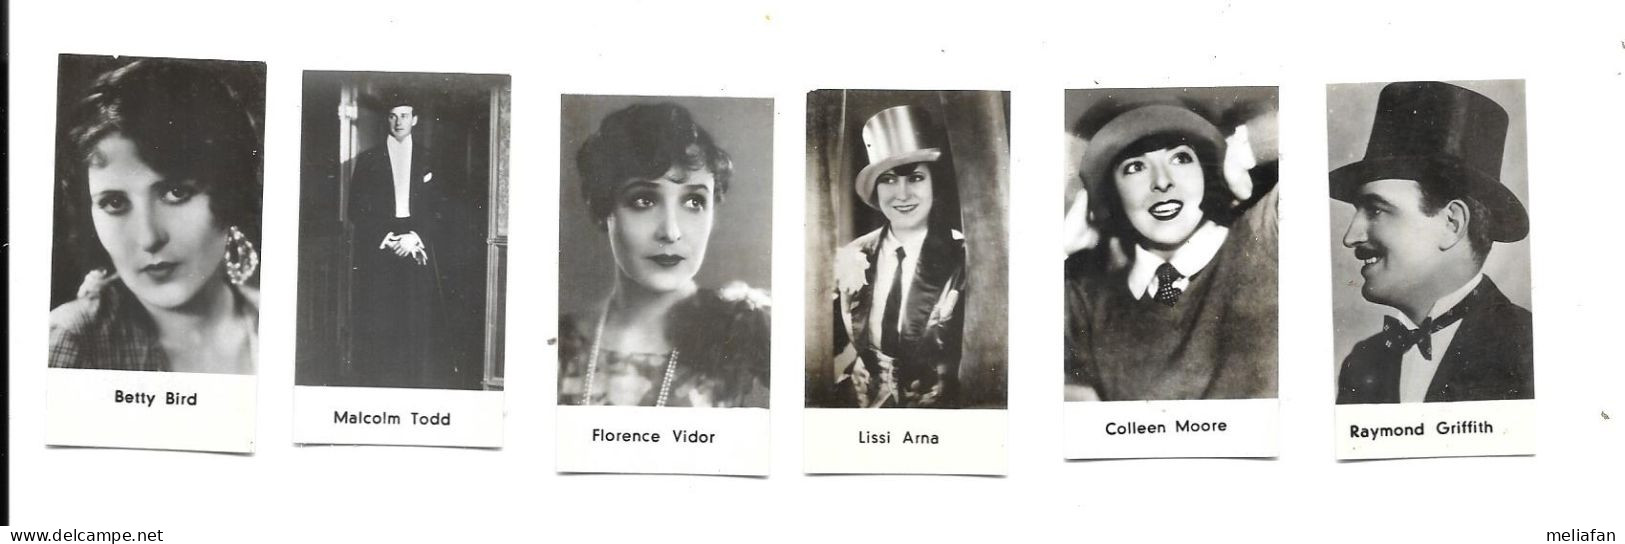 DV06 - VIGNETTES PHOTO - BETTY BIRD - COLLEEN MOORE - LISSI ARNA - RAYMOND GRIFFITH - FLORENCE VIDOR - MALCOLM TODD - Fotos